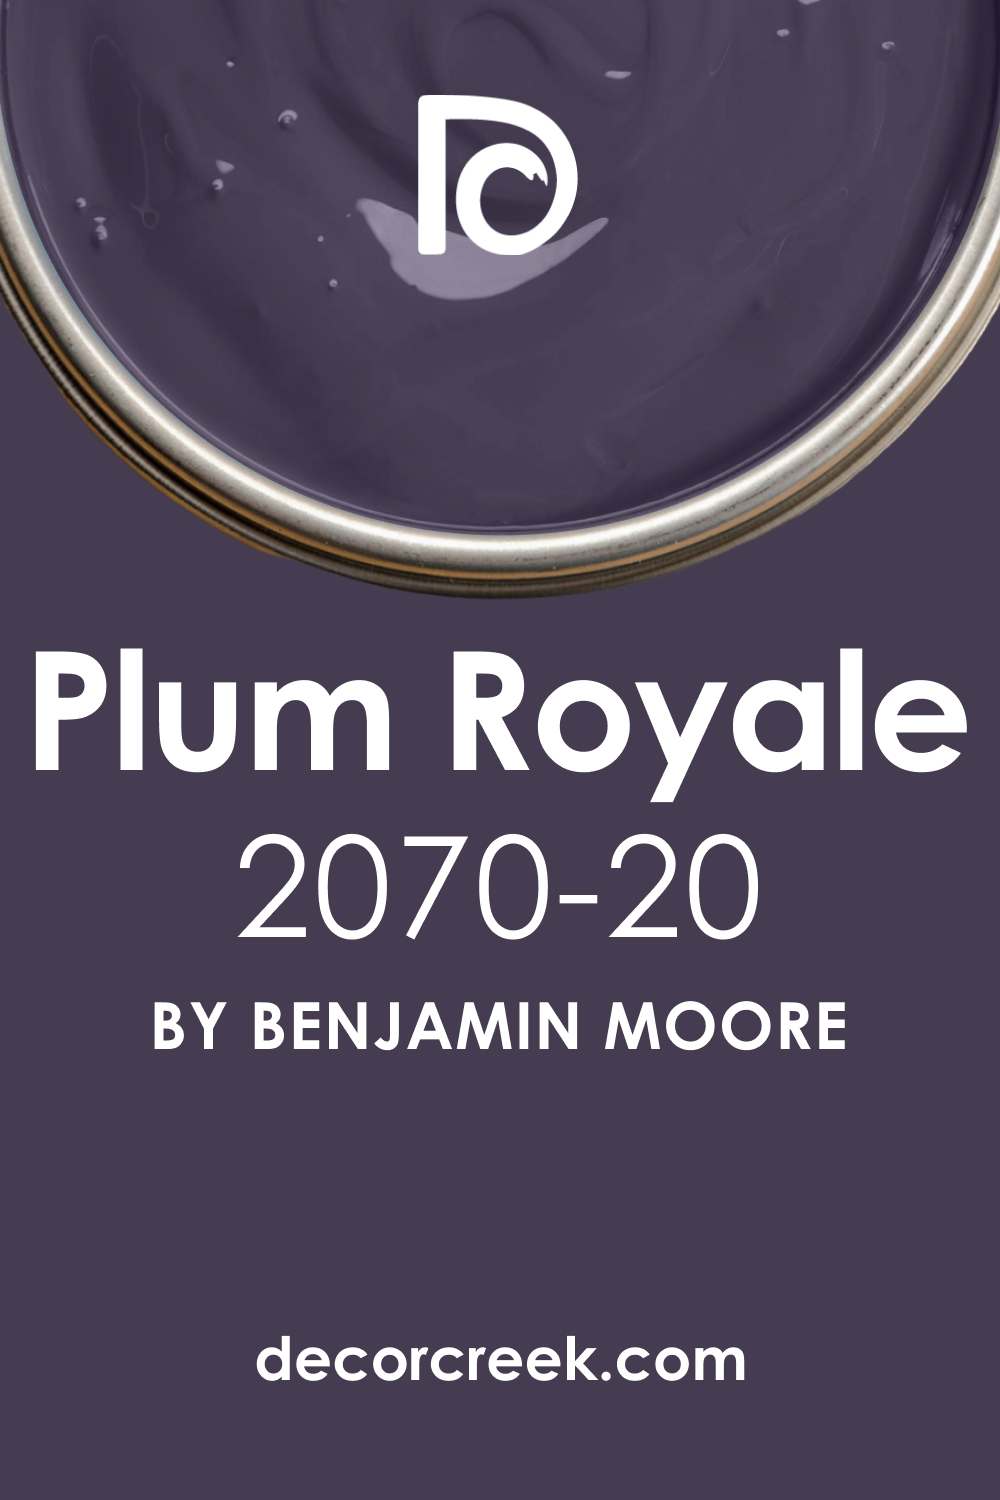 What Color Is Plum Royale 2070-20?